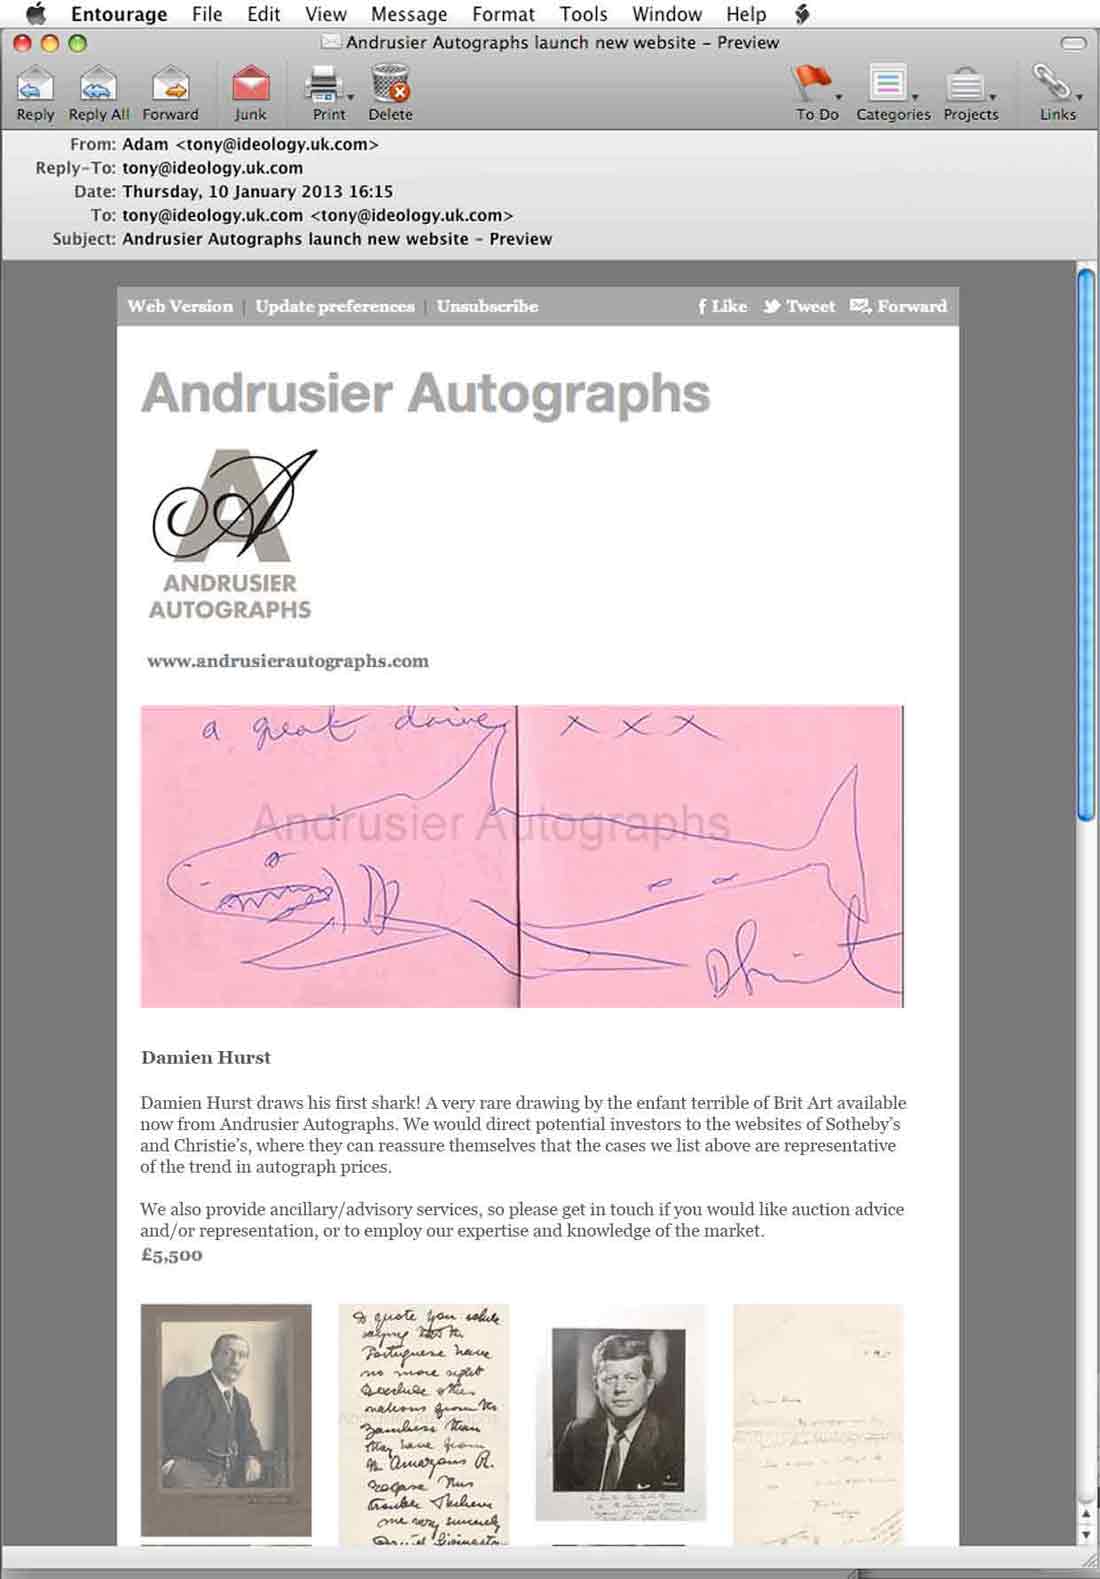 andrusier autographs email newsletter designed by ideology.uk.com